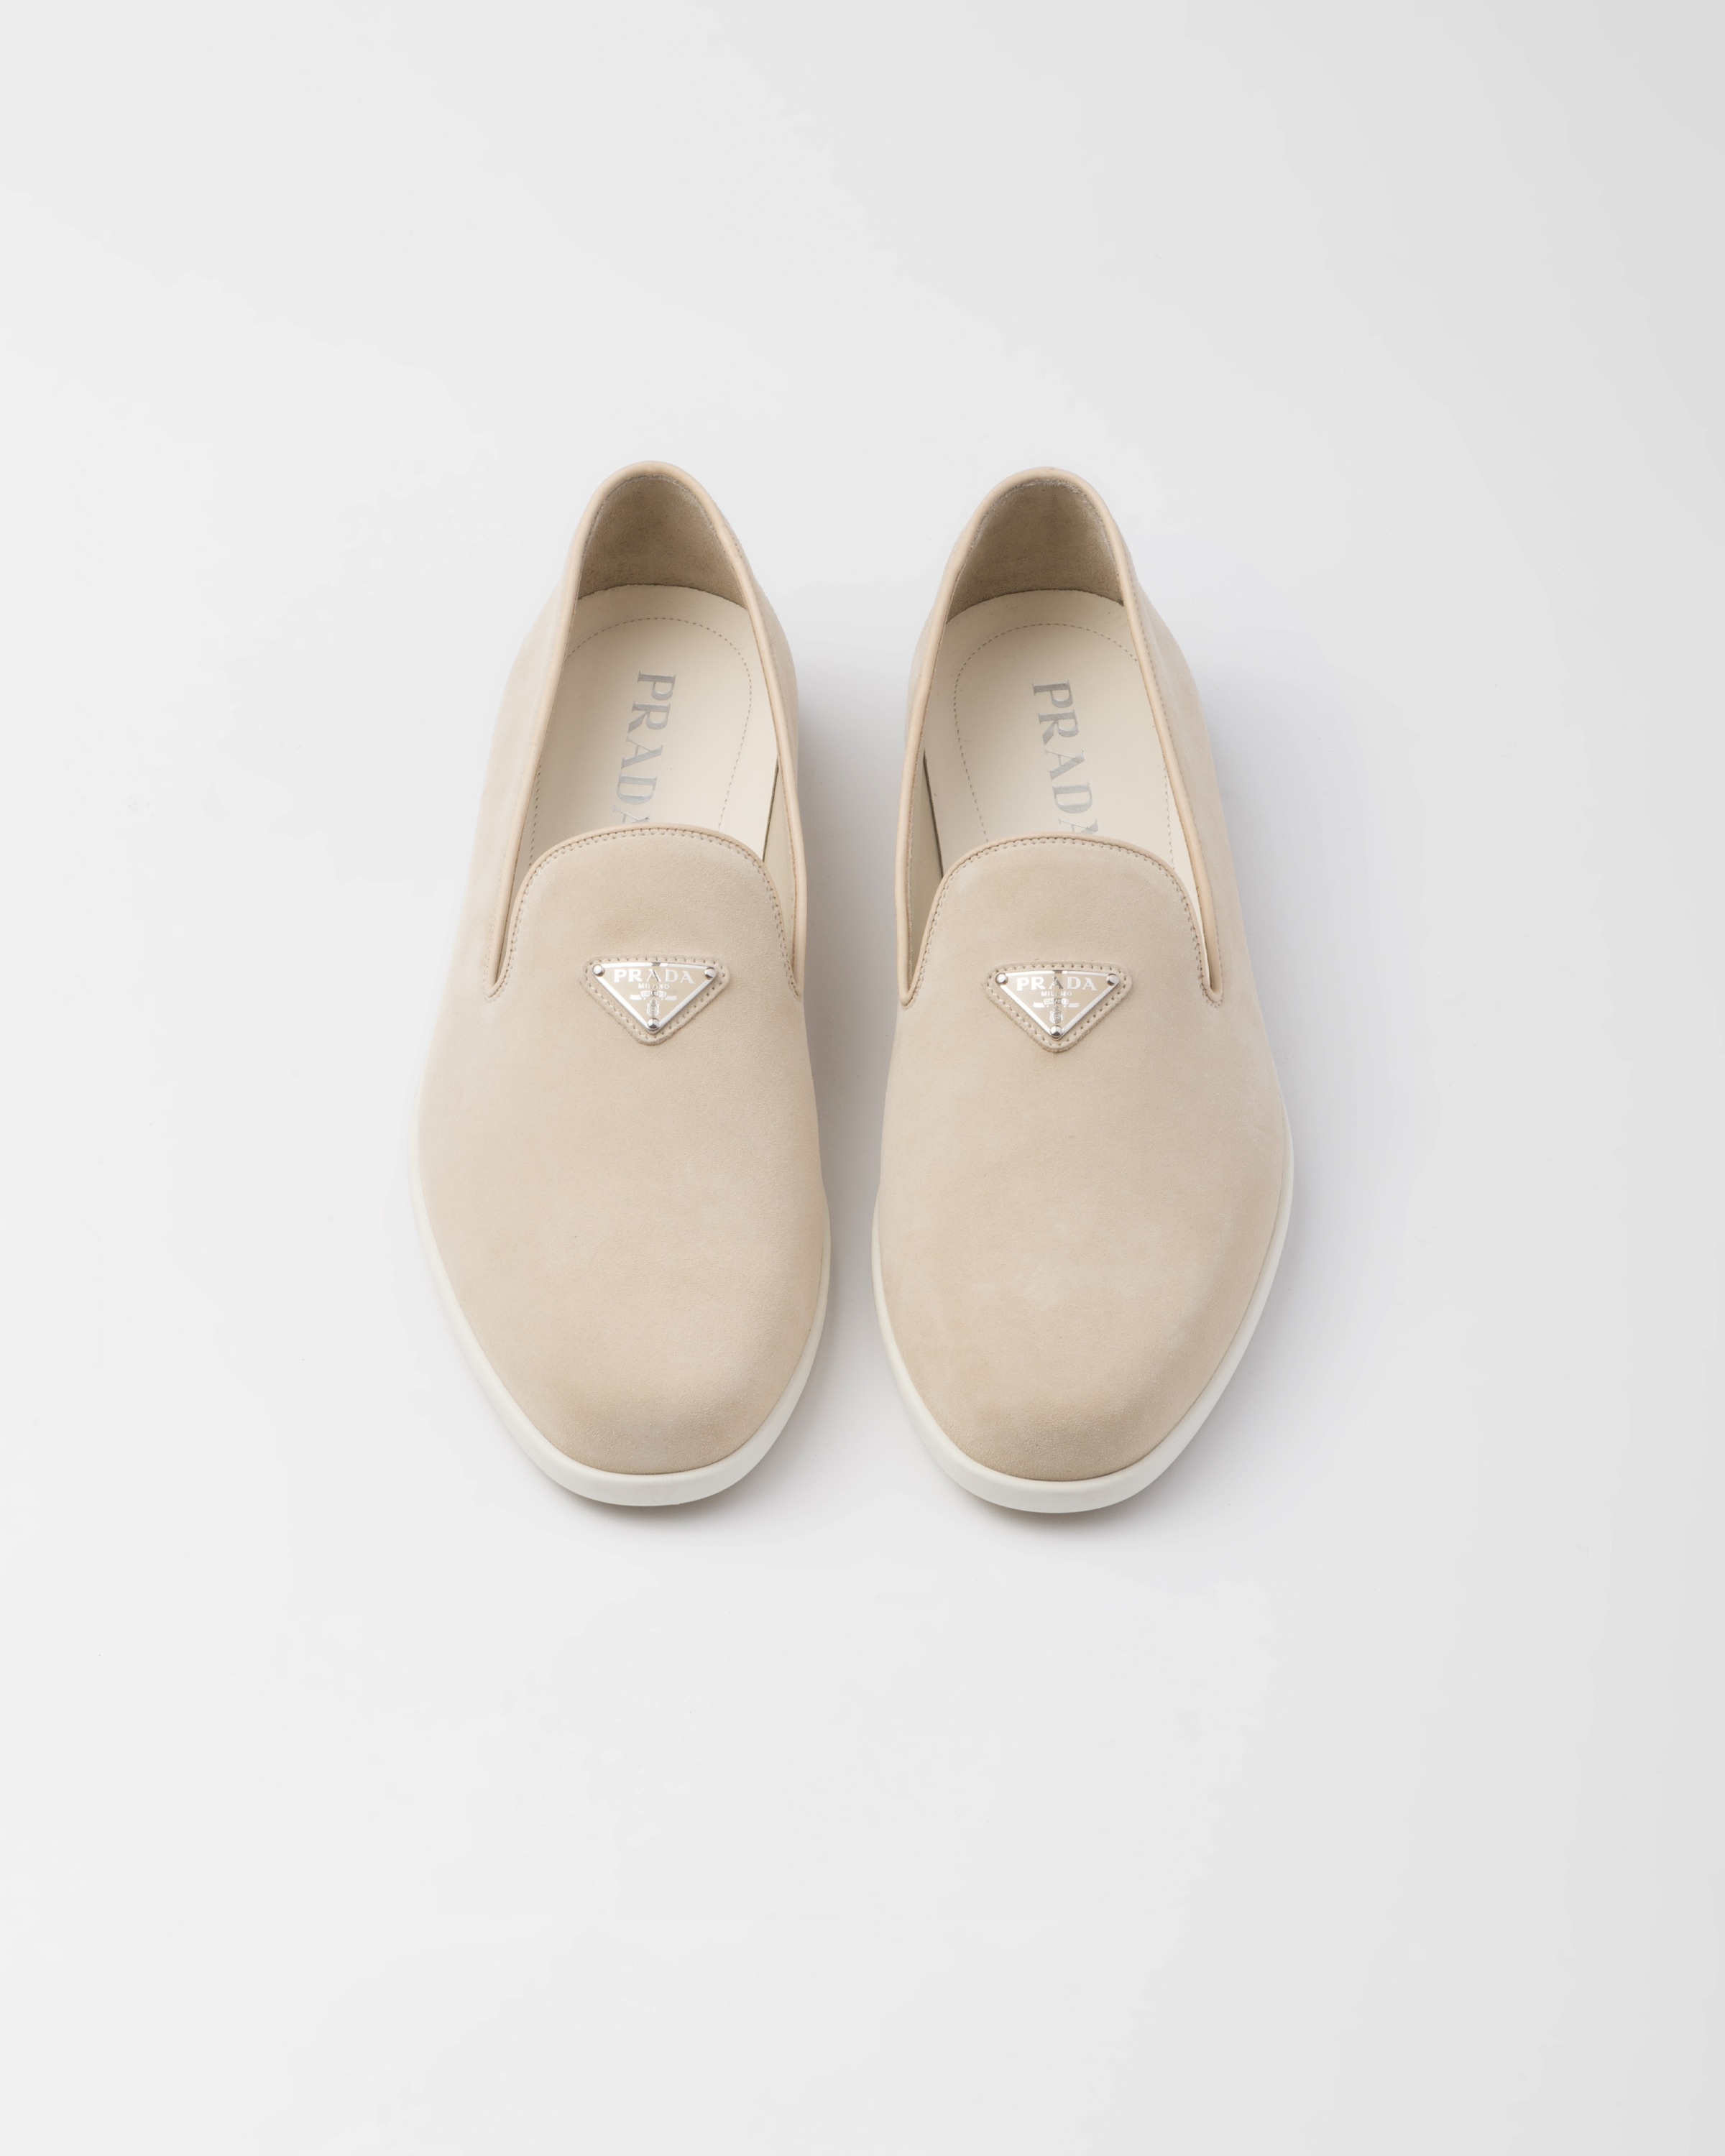 Suede calf leather slip-ons - 4